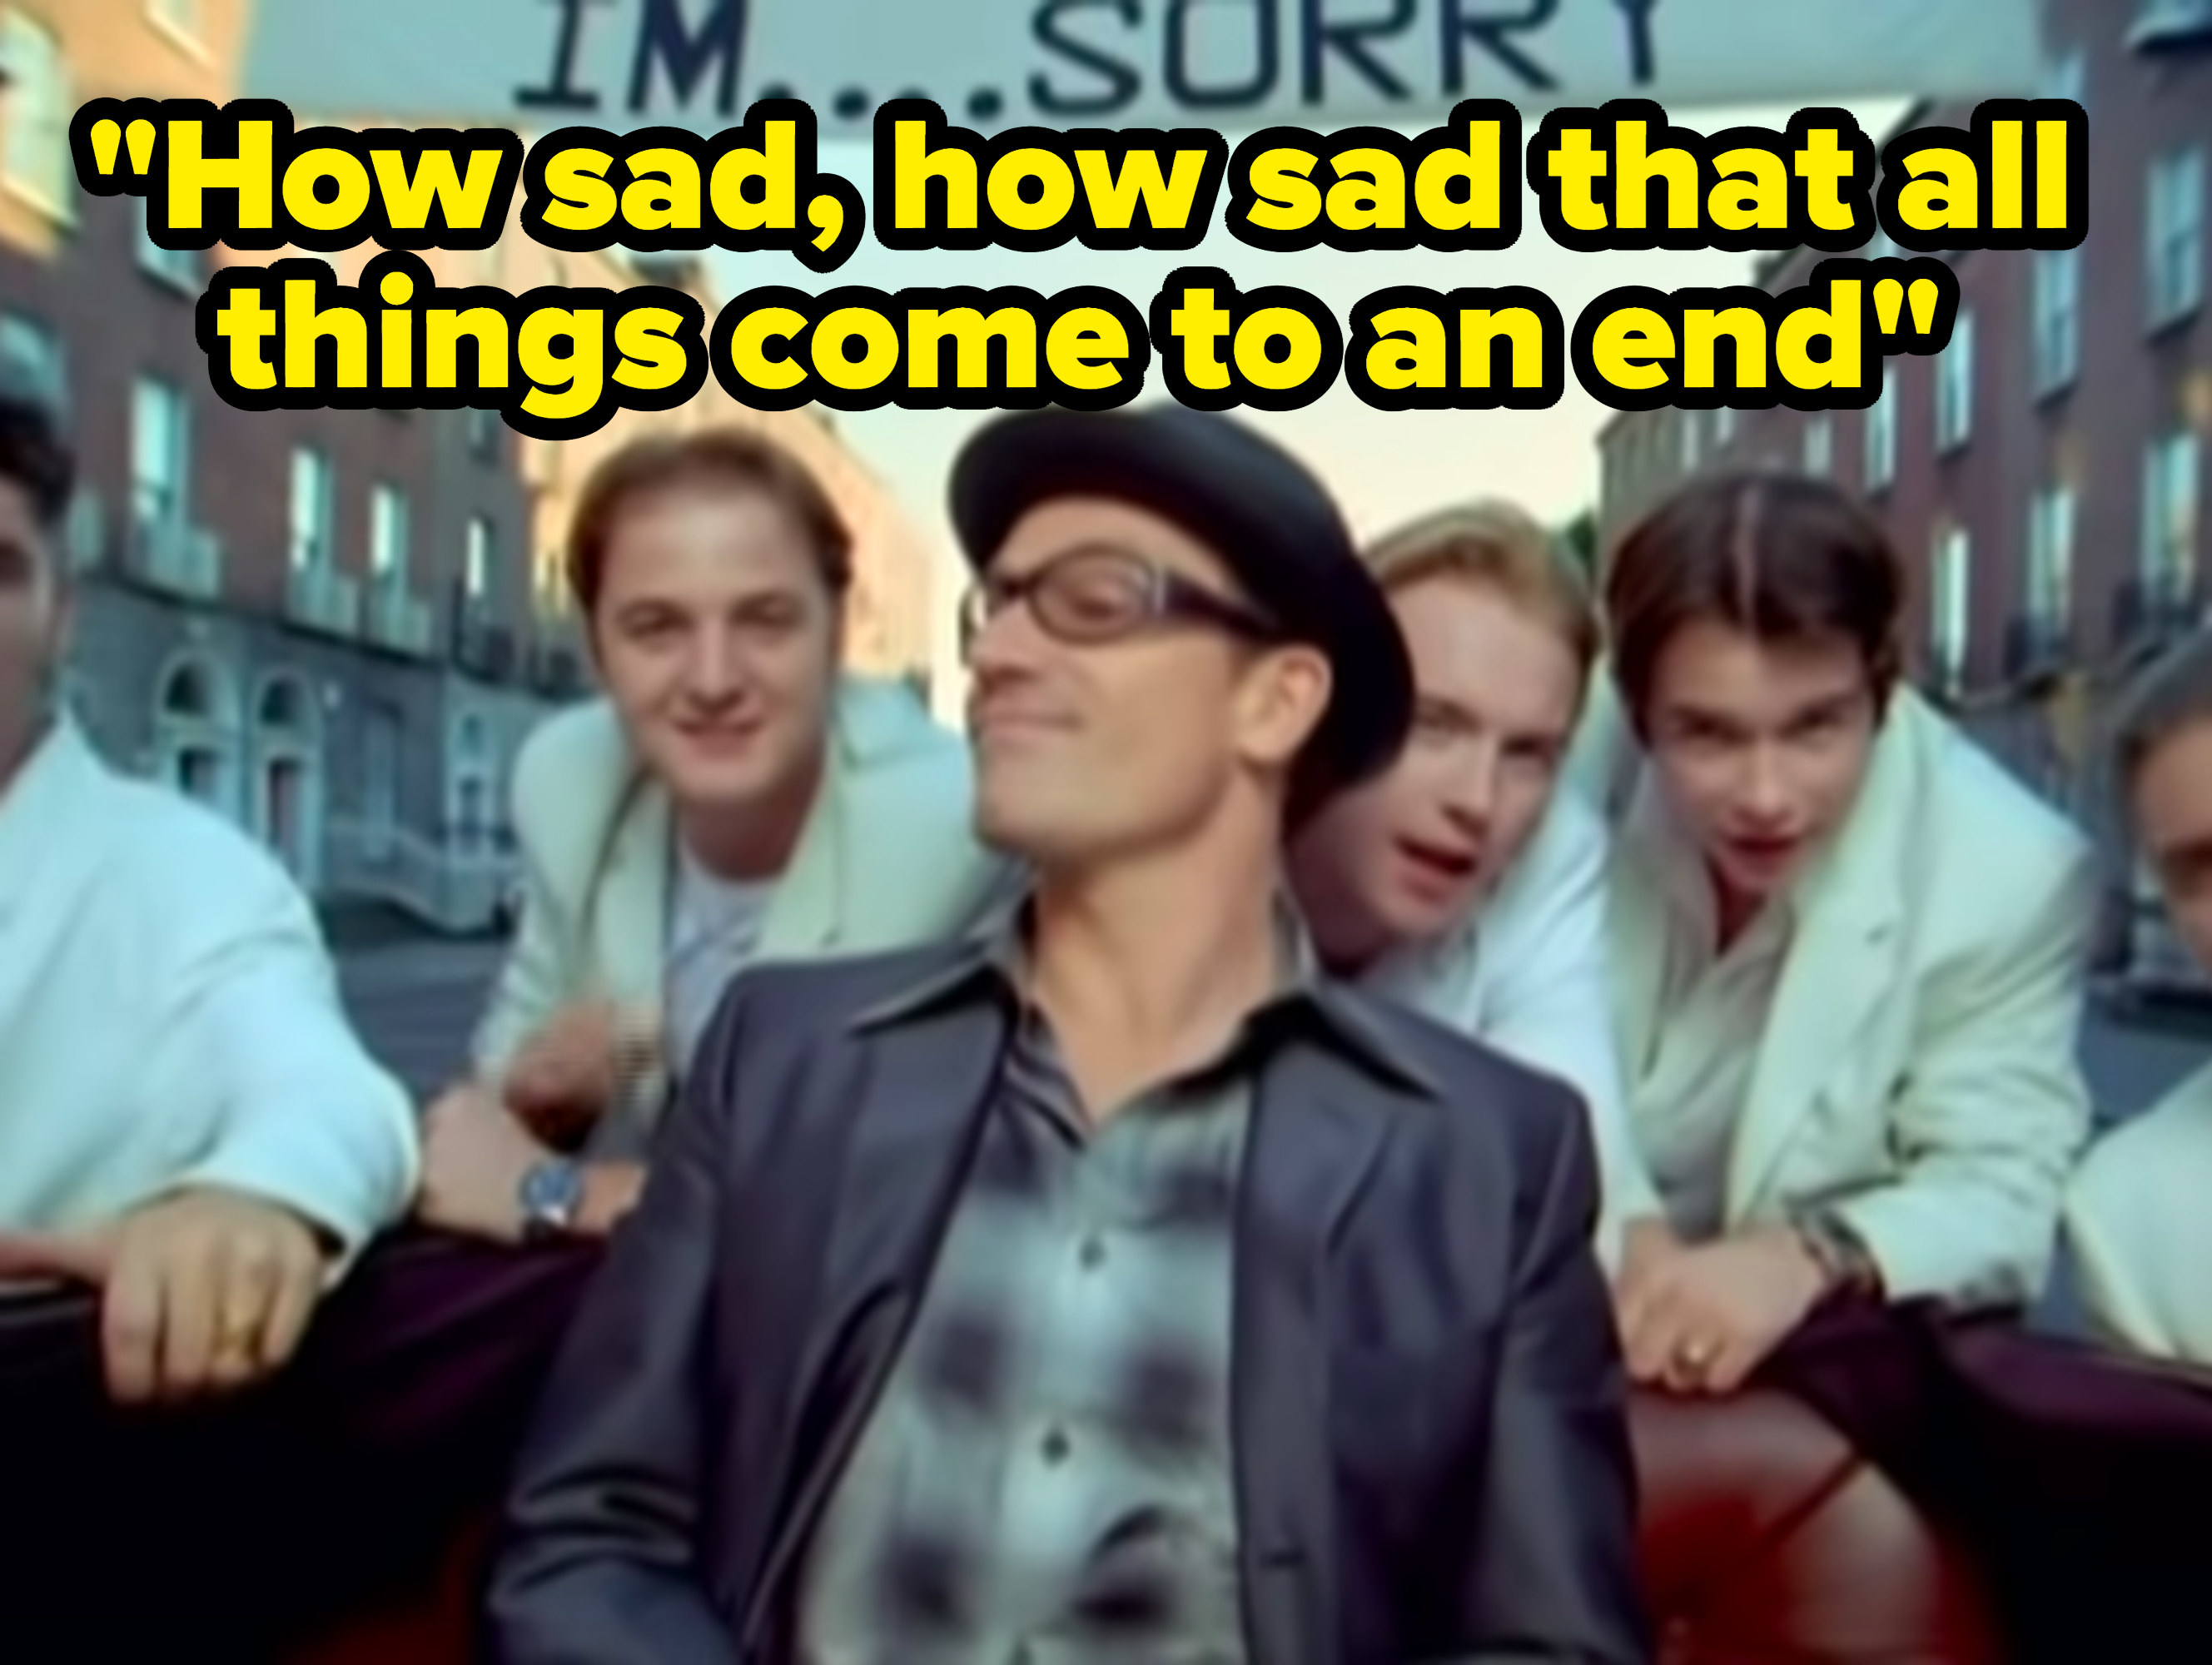 Still from the music video with the lyric: &quot;How sad, how sad that all things come to an end&quot;